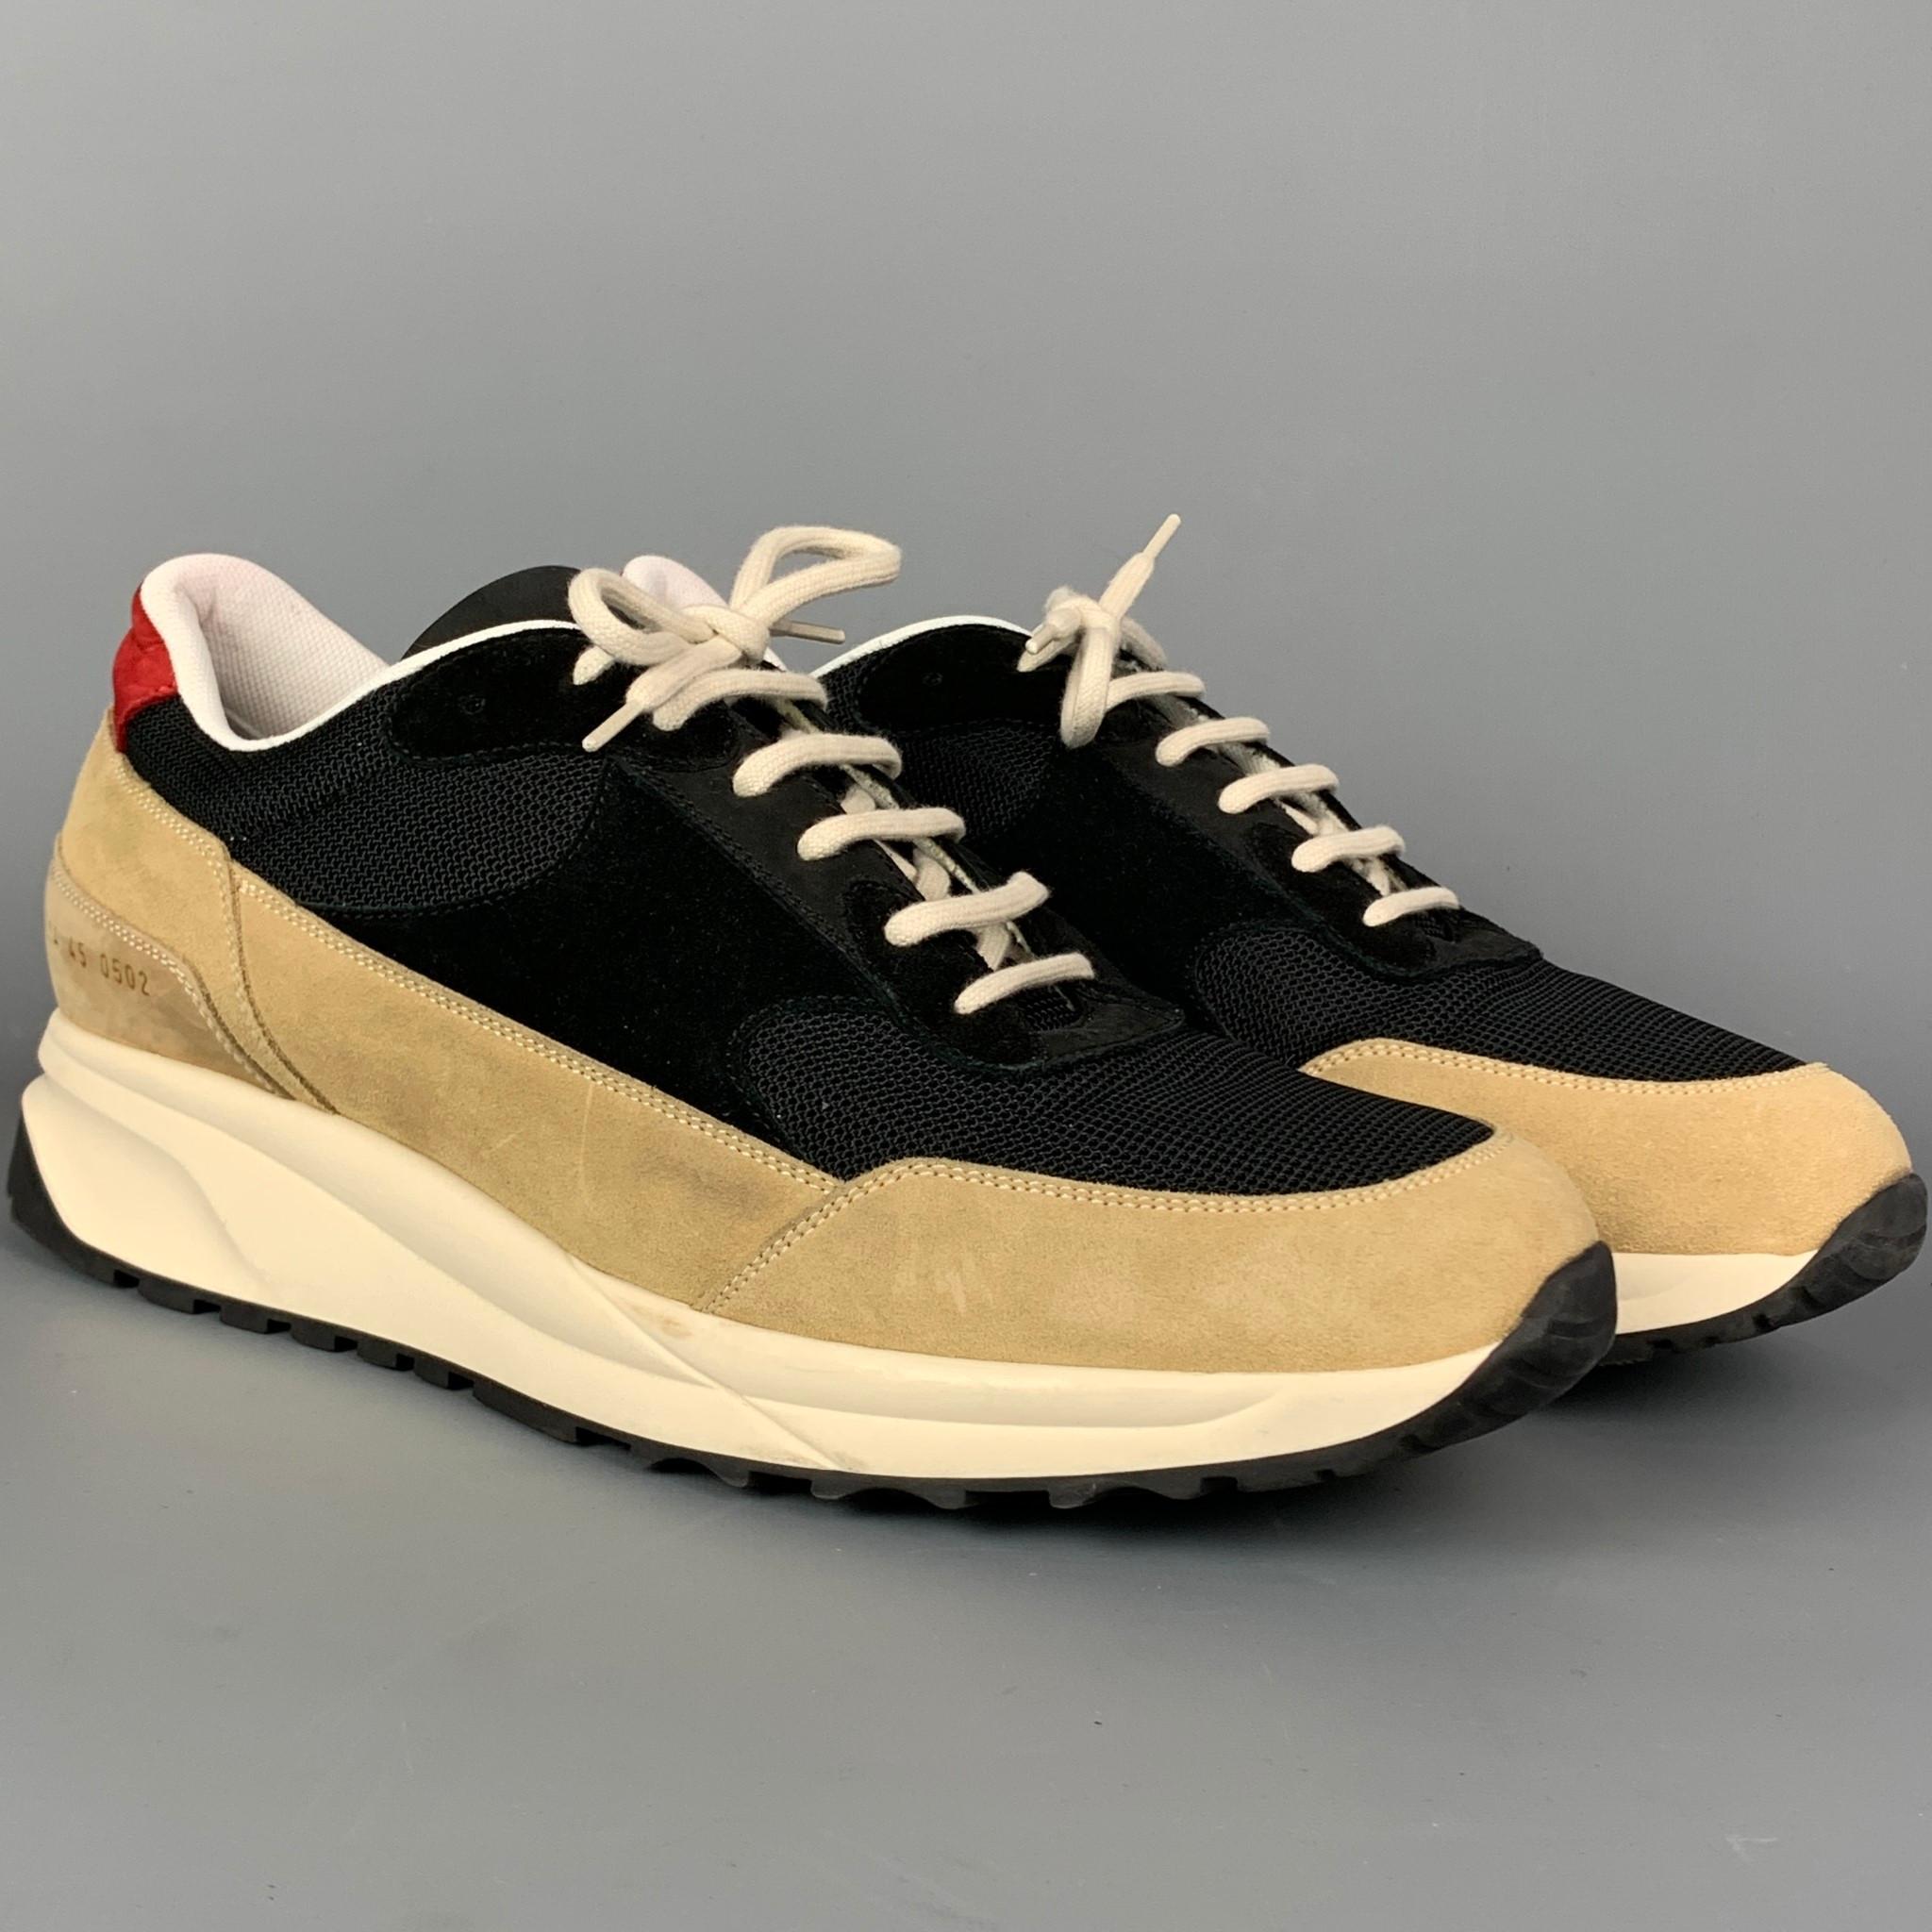 COMMON PROJECTS sneakers comes in a tan suede with a color block navy nylon featuring a rubber sole and a lace up closure. Made in Italy.

Very Good Pre-Owned Condition.
Marked: 2214 45 0502

Outsole:

12 in. x 4.5 in. 

SKU: 109952
Category: